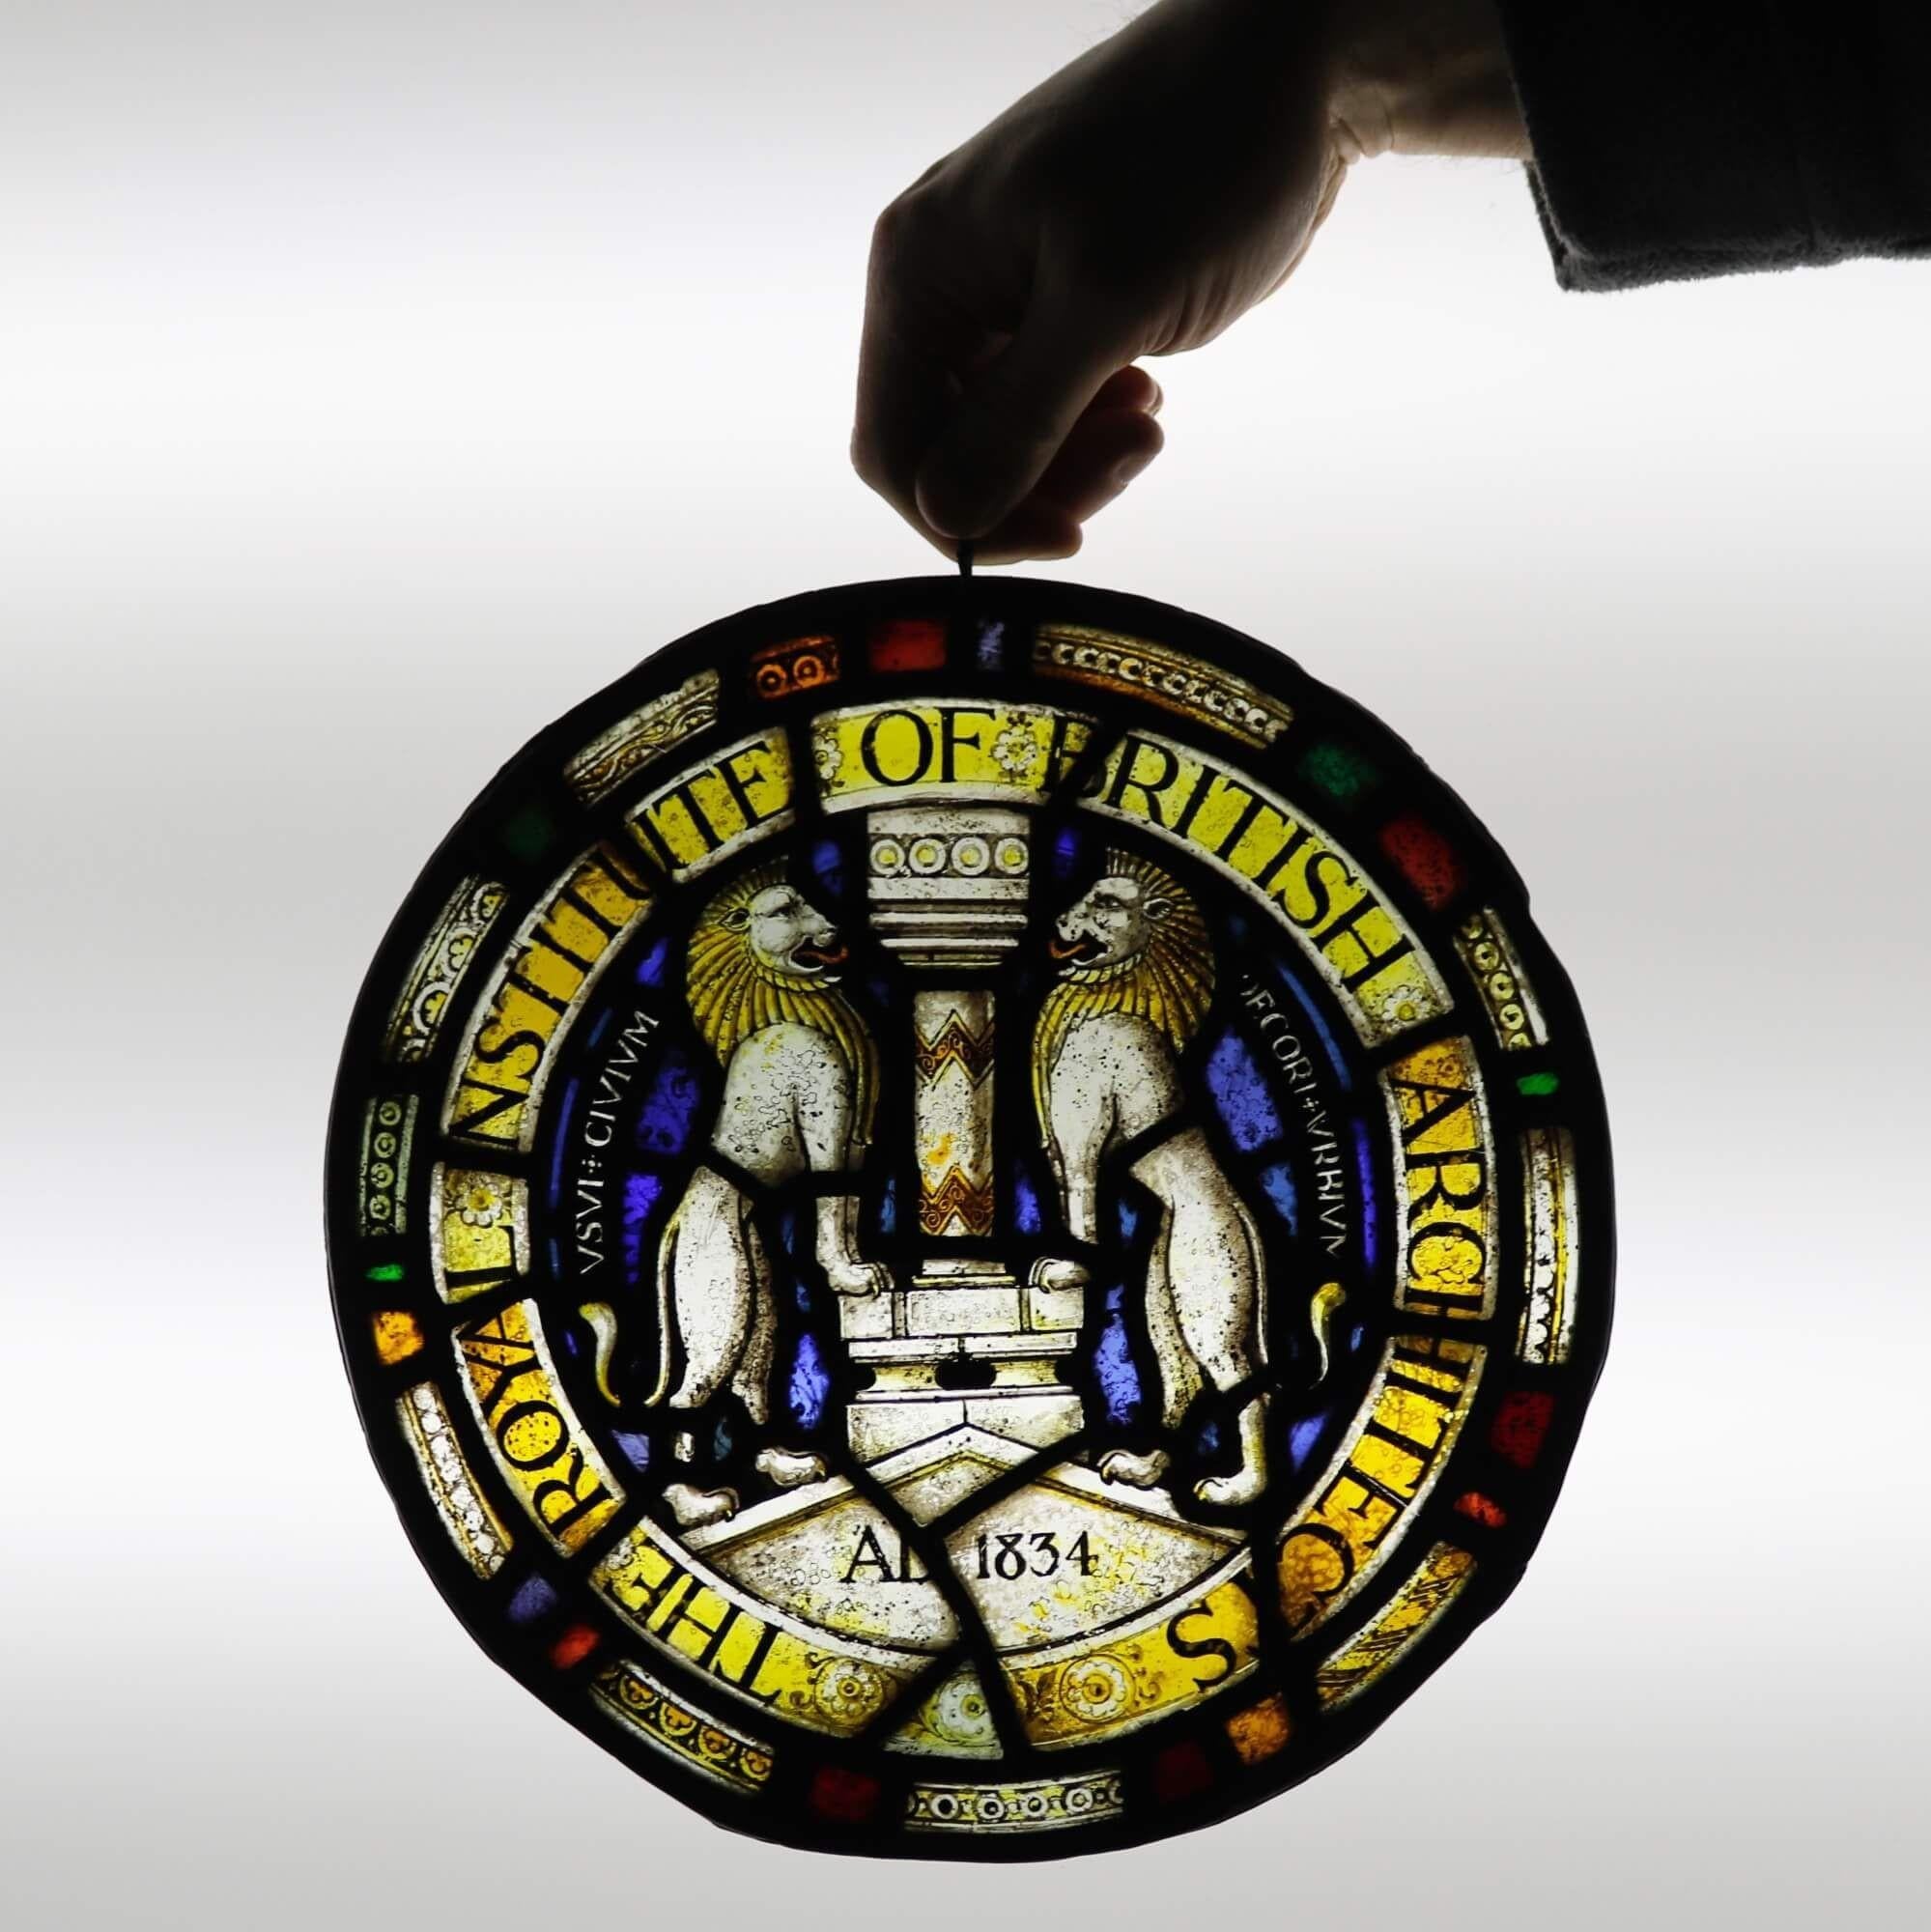 A late 19th century stained glass roundel detailed with the crest of The Royal Institute of British Architects (RIBA). The Institute was established in 1834 and remains to this day a symbol of excellence and professionalism in architecture. Formerly